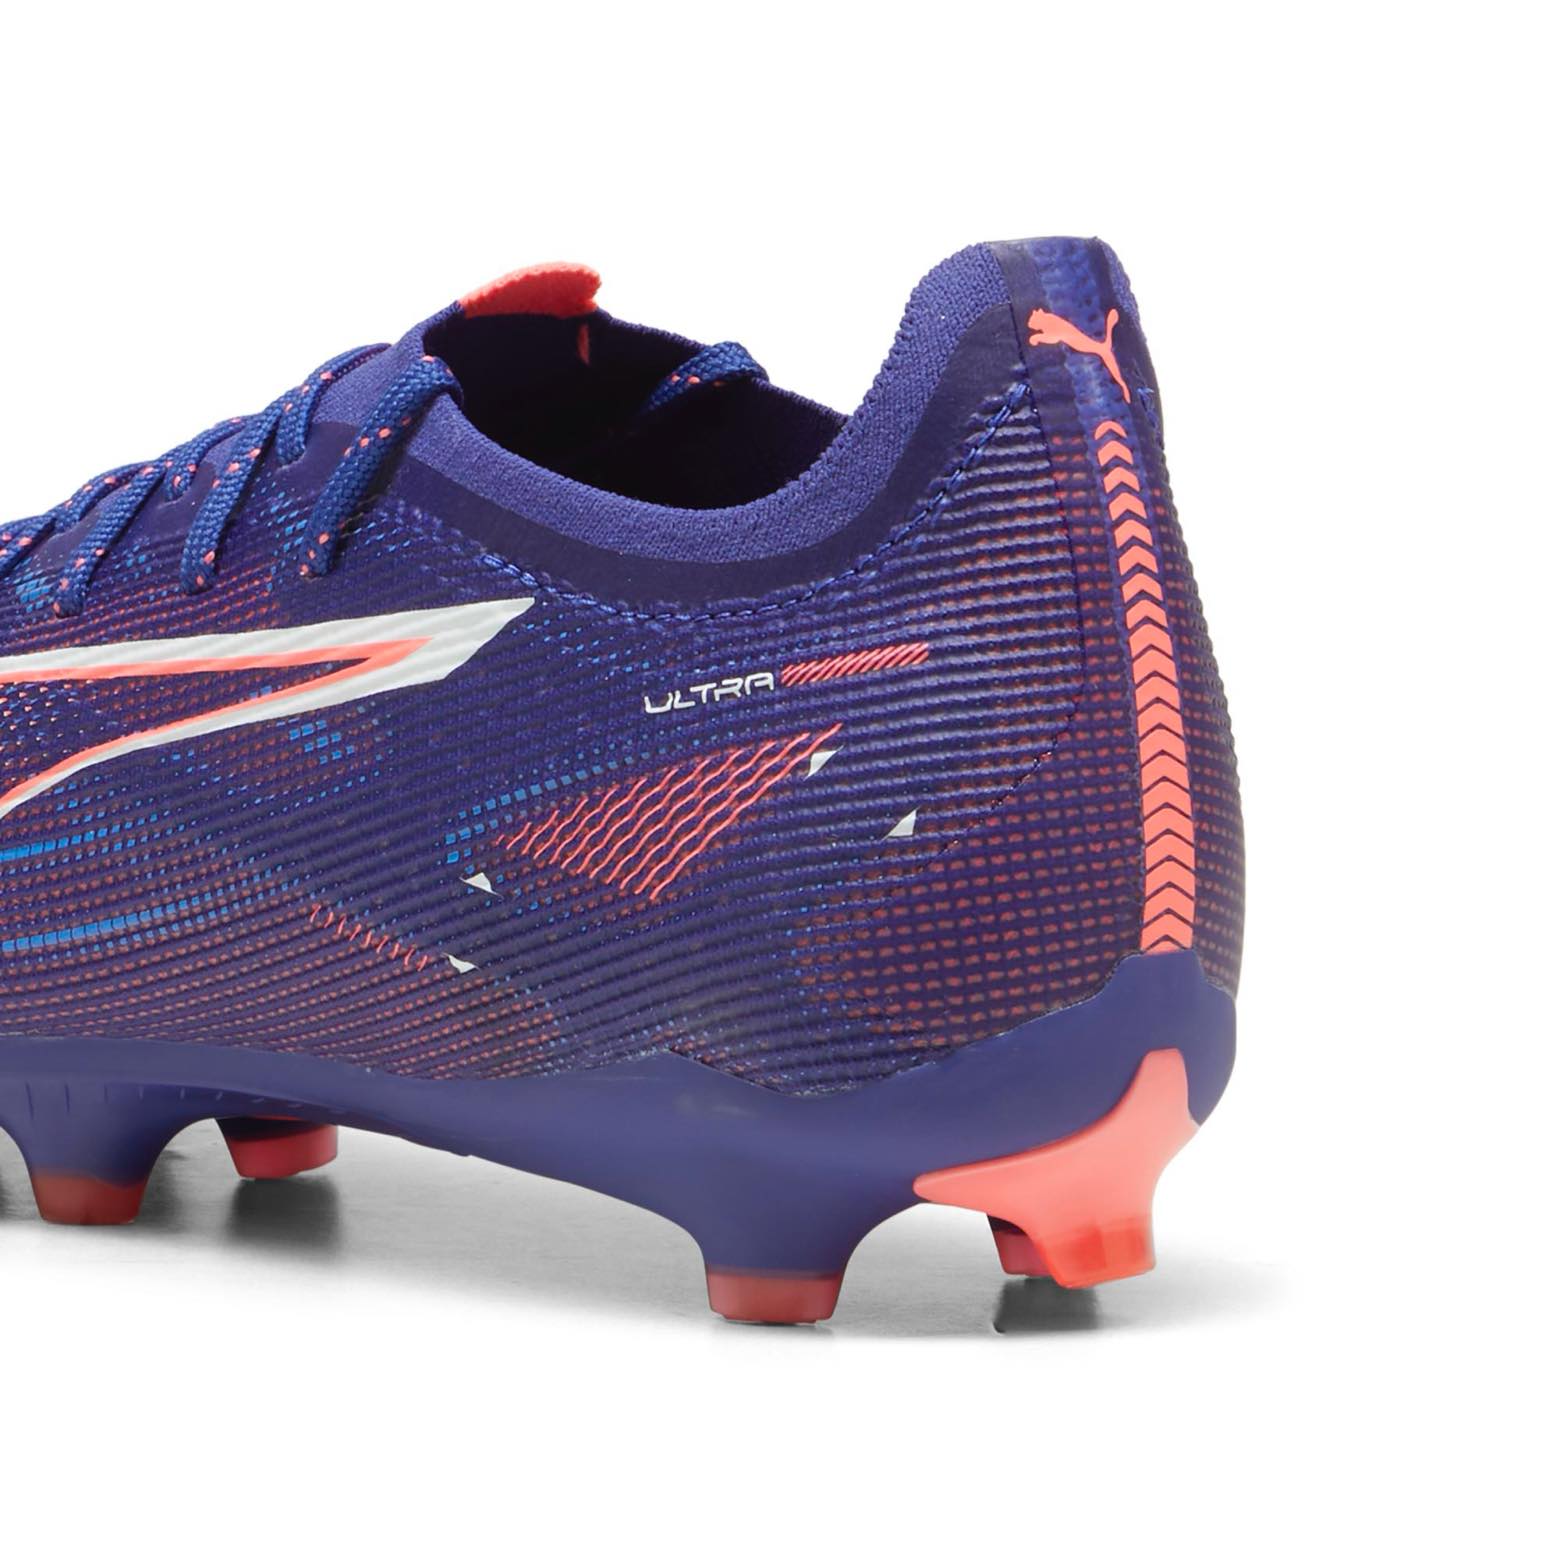 PUMA ULTRA Pro FG/AG Soccer Cleats - Speed, Traction, Stability, Suitable for Firm and Artificial Ground